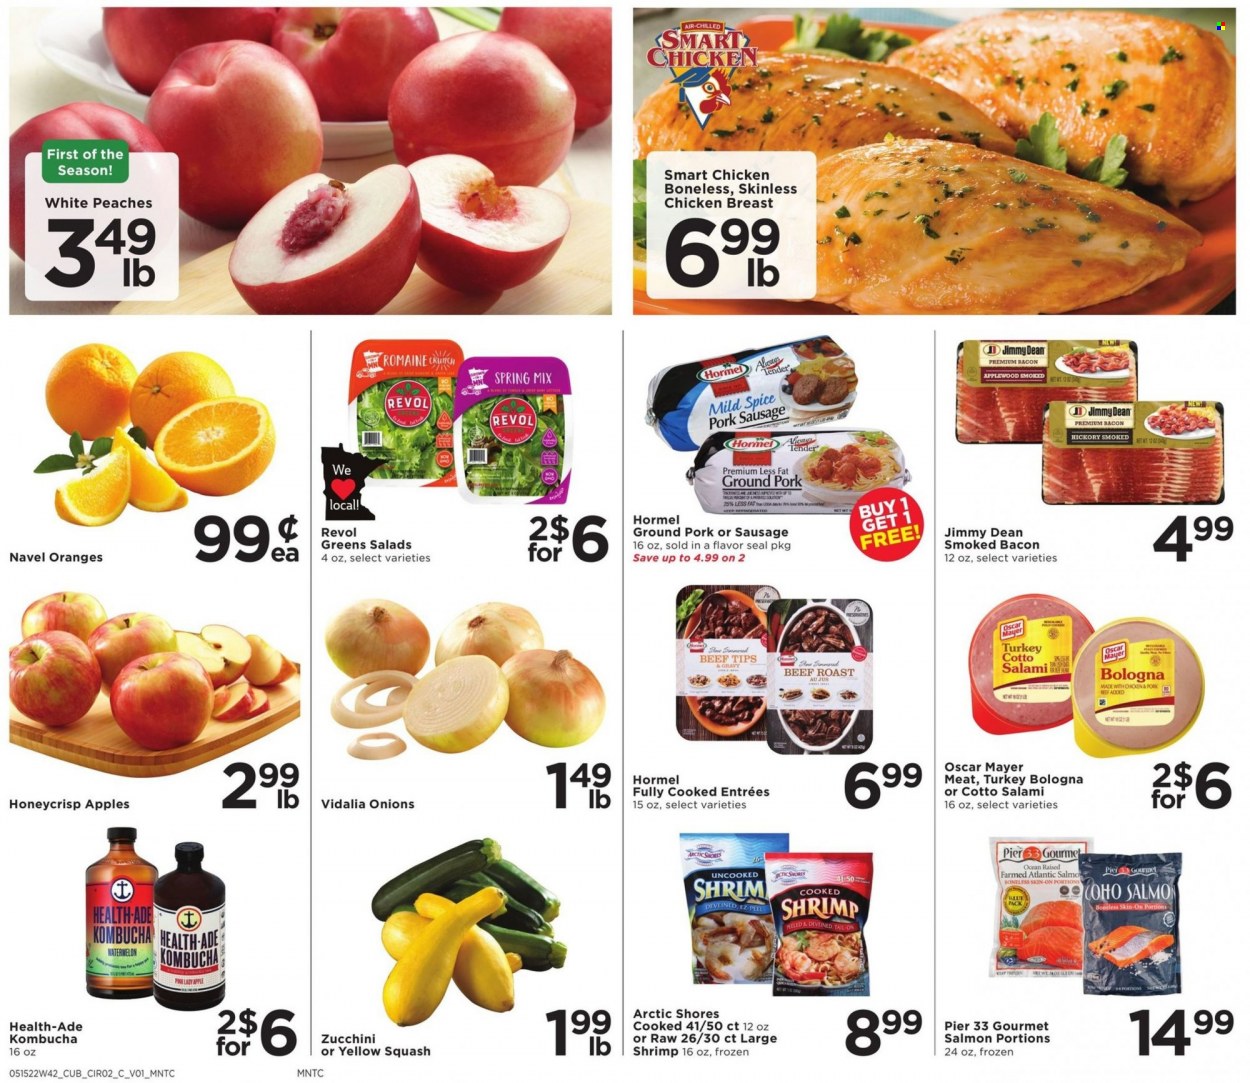 thumbnail - Cub Foods Flyer - 05/15/2022 - 05/21/2022 - Sales products - zucchini, onion, yellow squash, apples, watermelon, oranges, Pink Lady, salmon, shrimps, Arctic Shores, Jimmy Dean, Hormel, bacon, salami, bologna sausage, Oscar Mayer, sausage, pork sausage, spice, kombucha, chicken breasts, beef meat, roast beef, ground pork, peaches, navel oranges. Page 2.